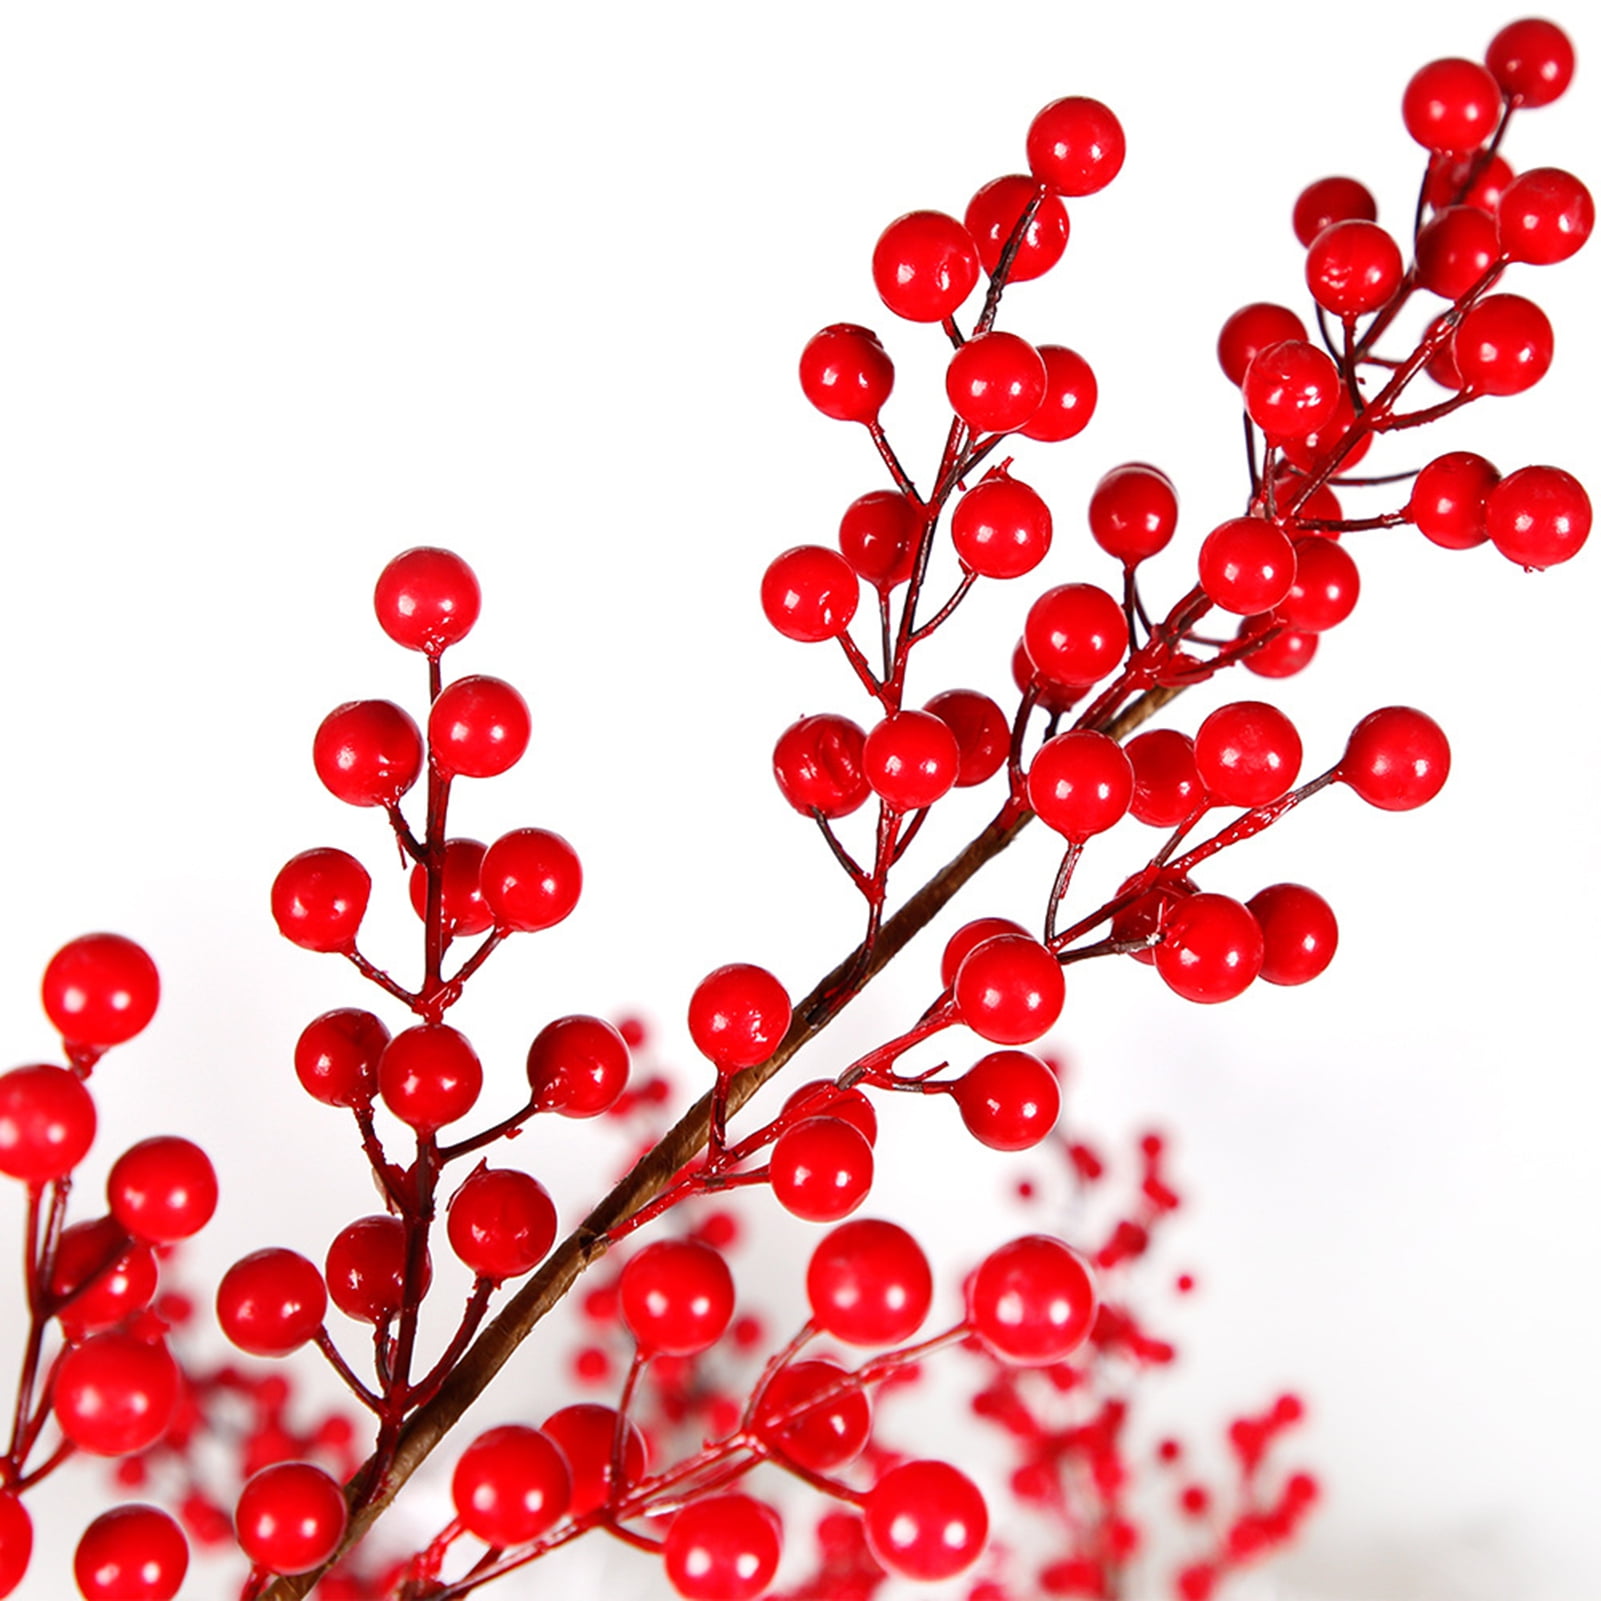 Red Waterproof Holly Berry Stems with 35 Lifelike Berries, 19-Inch, Festive Holiday Decor, Trees, Wreaths, & Garlands, Christmas Berries, Home & Office Decor (Set of 72)